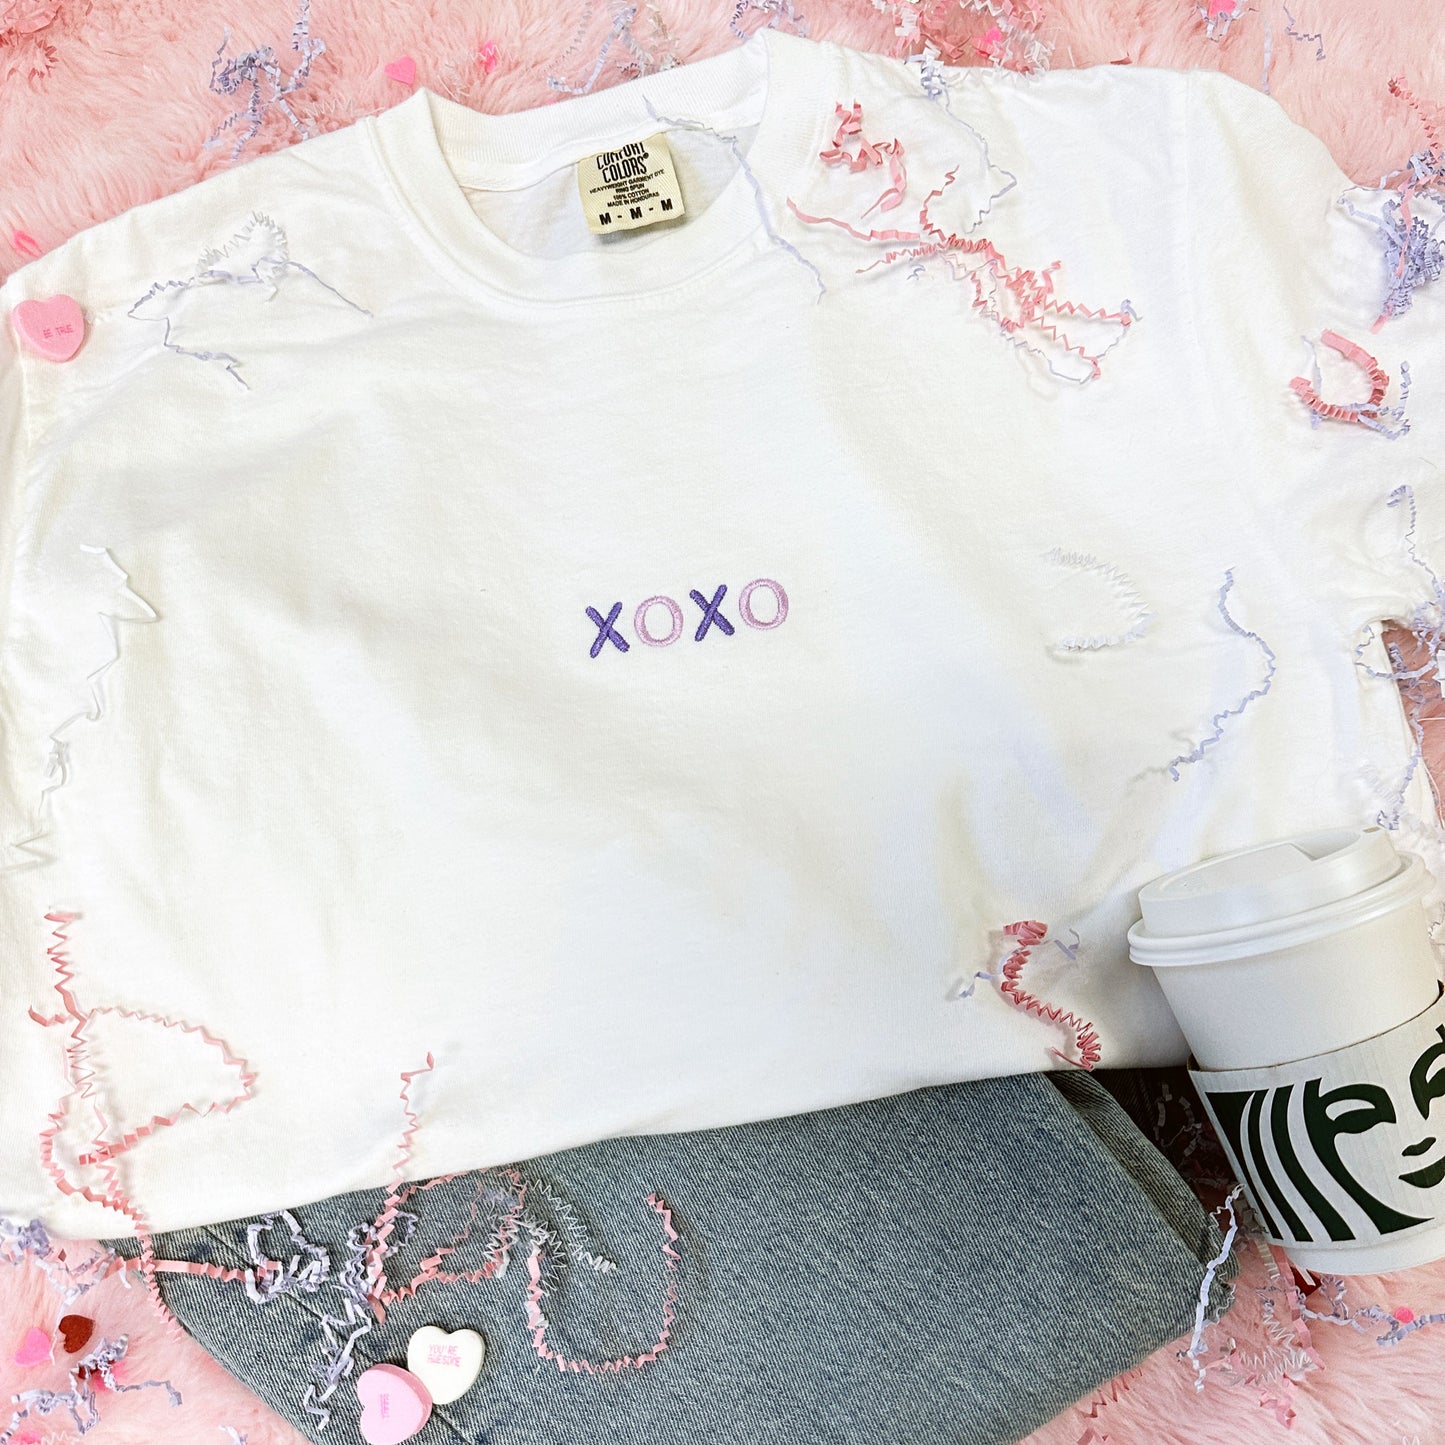 styled white t-shirt with jeans and a starbucks coffee cup. Th e tshirt has xoxo embroidered small on the center chest in alternating purple  and lilac threads